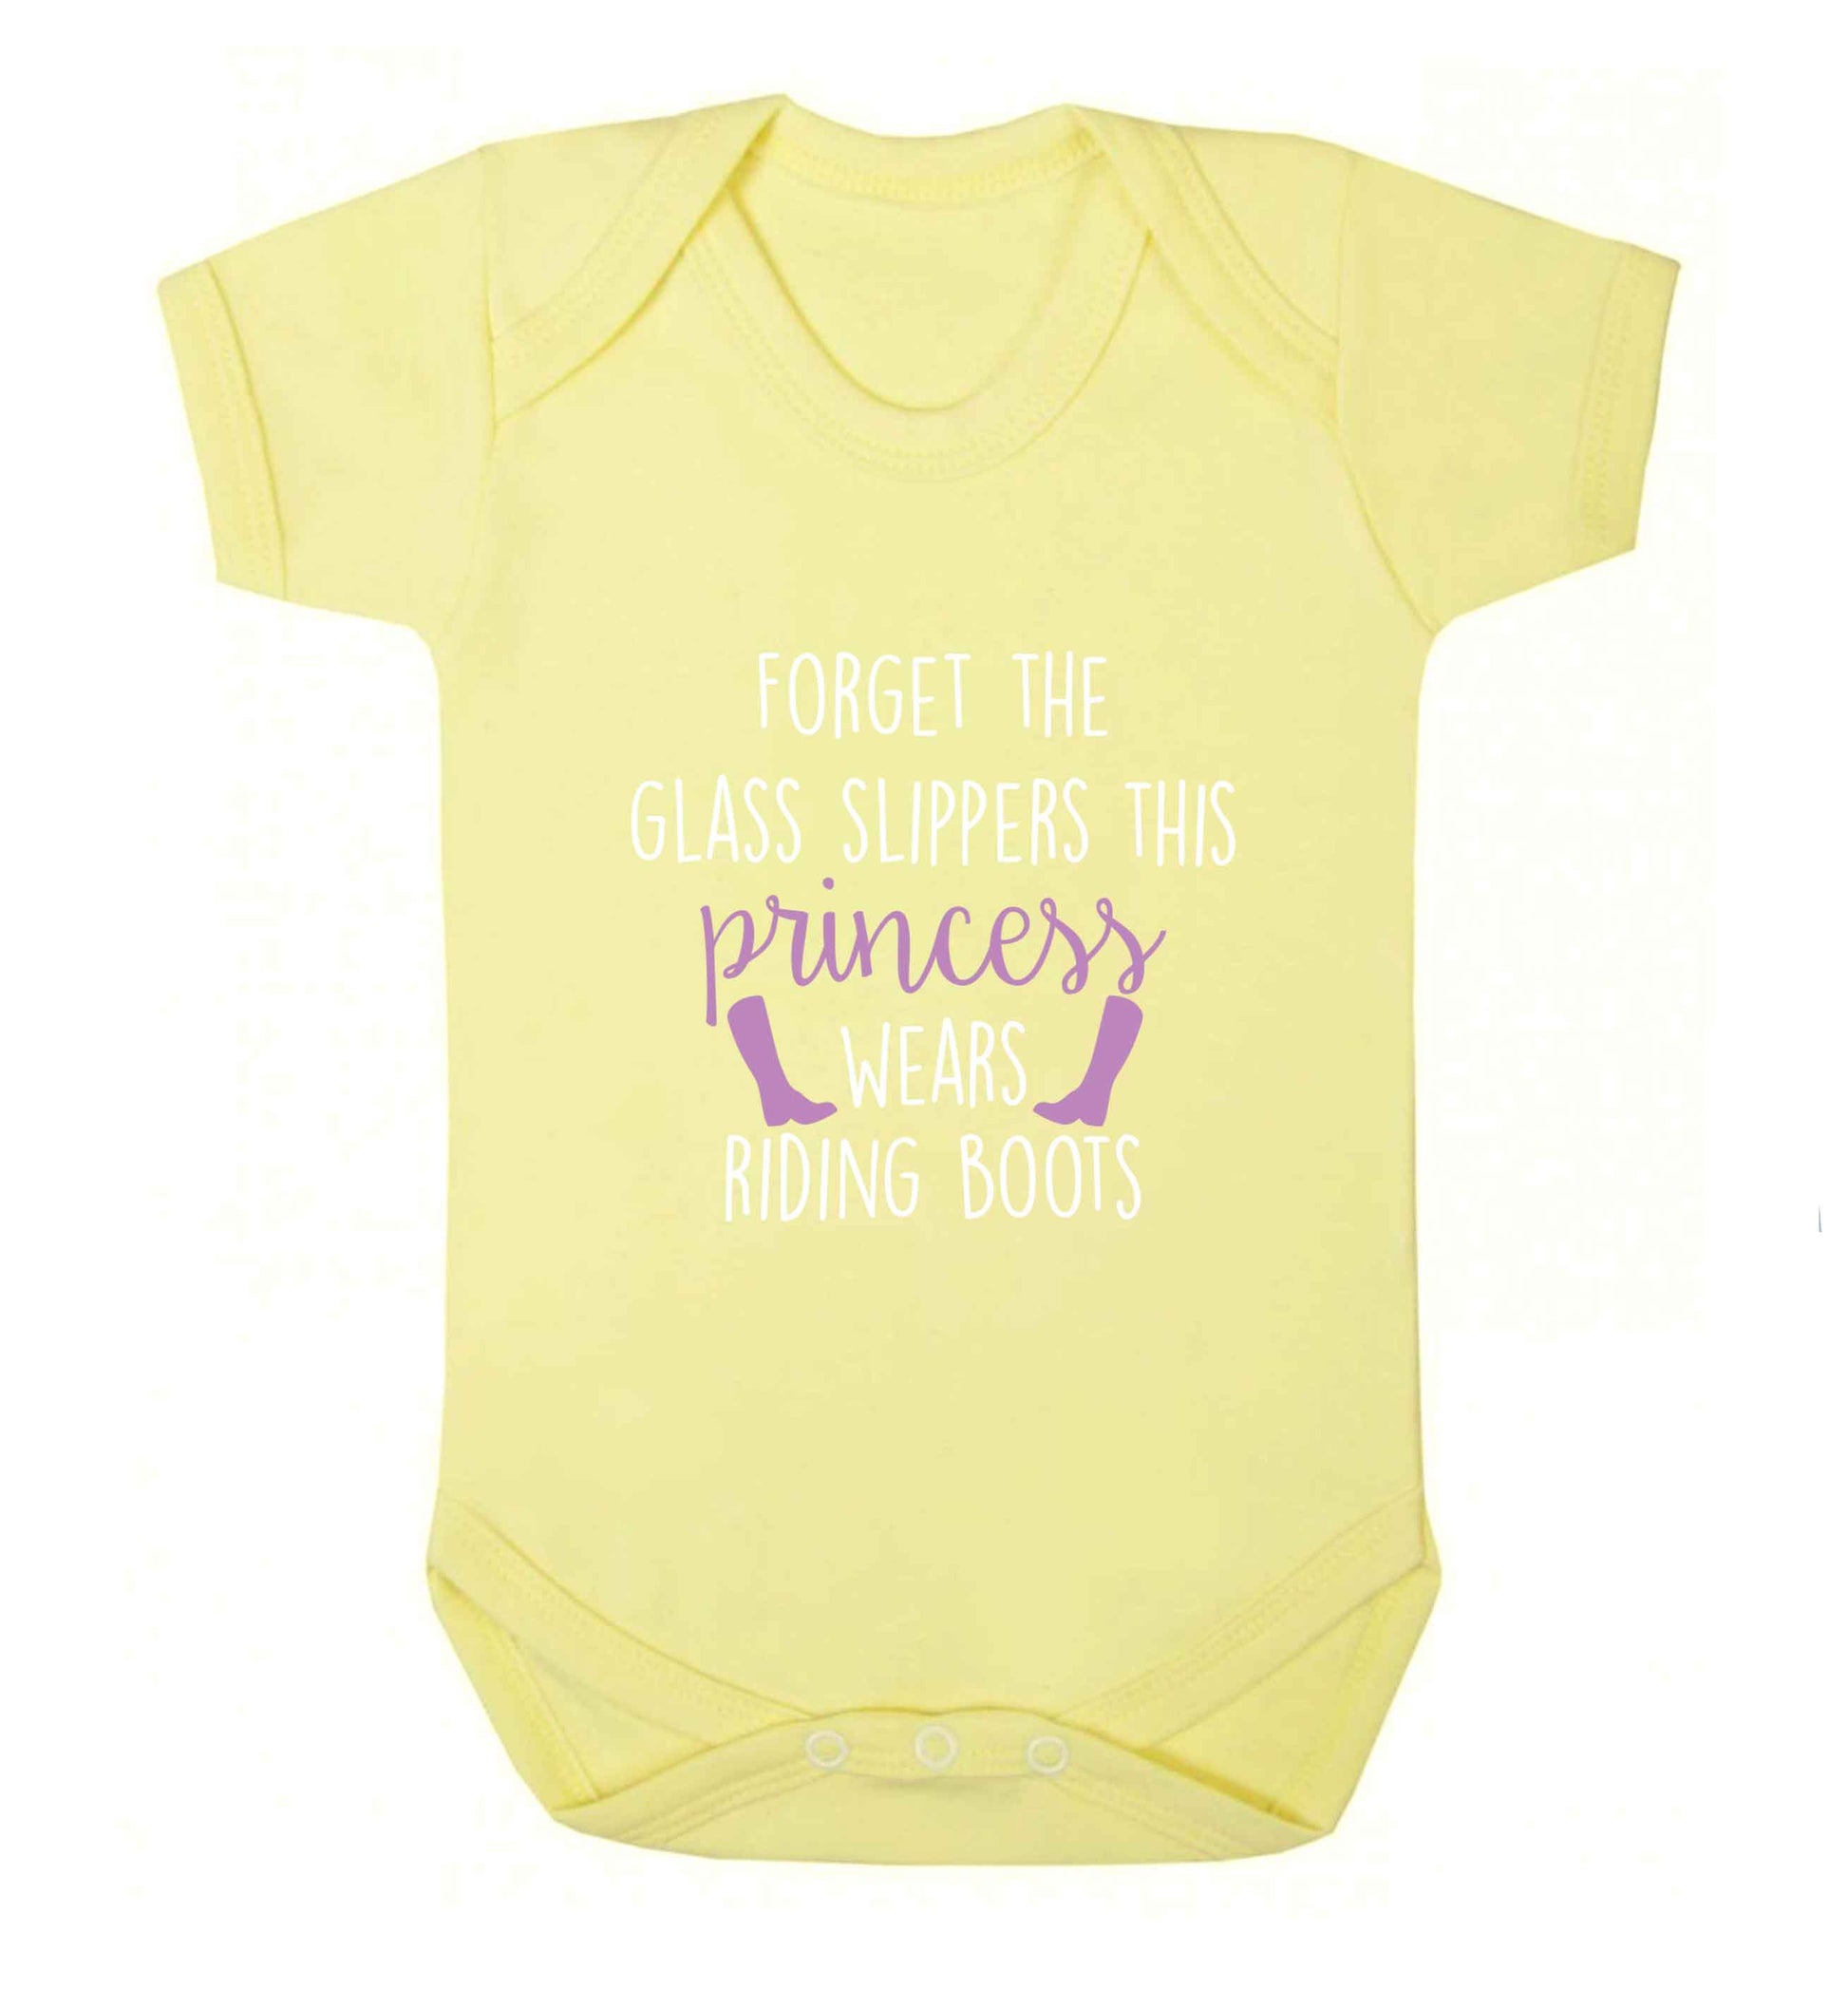 Forget the glass slippers this princess wears riding boots baby vest pale yellow 18-24 months